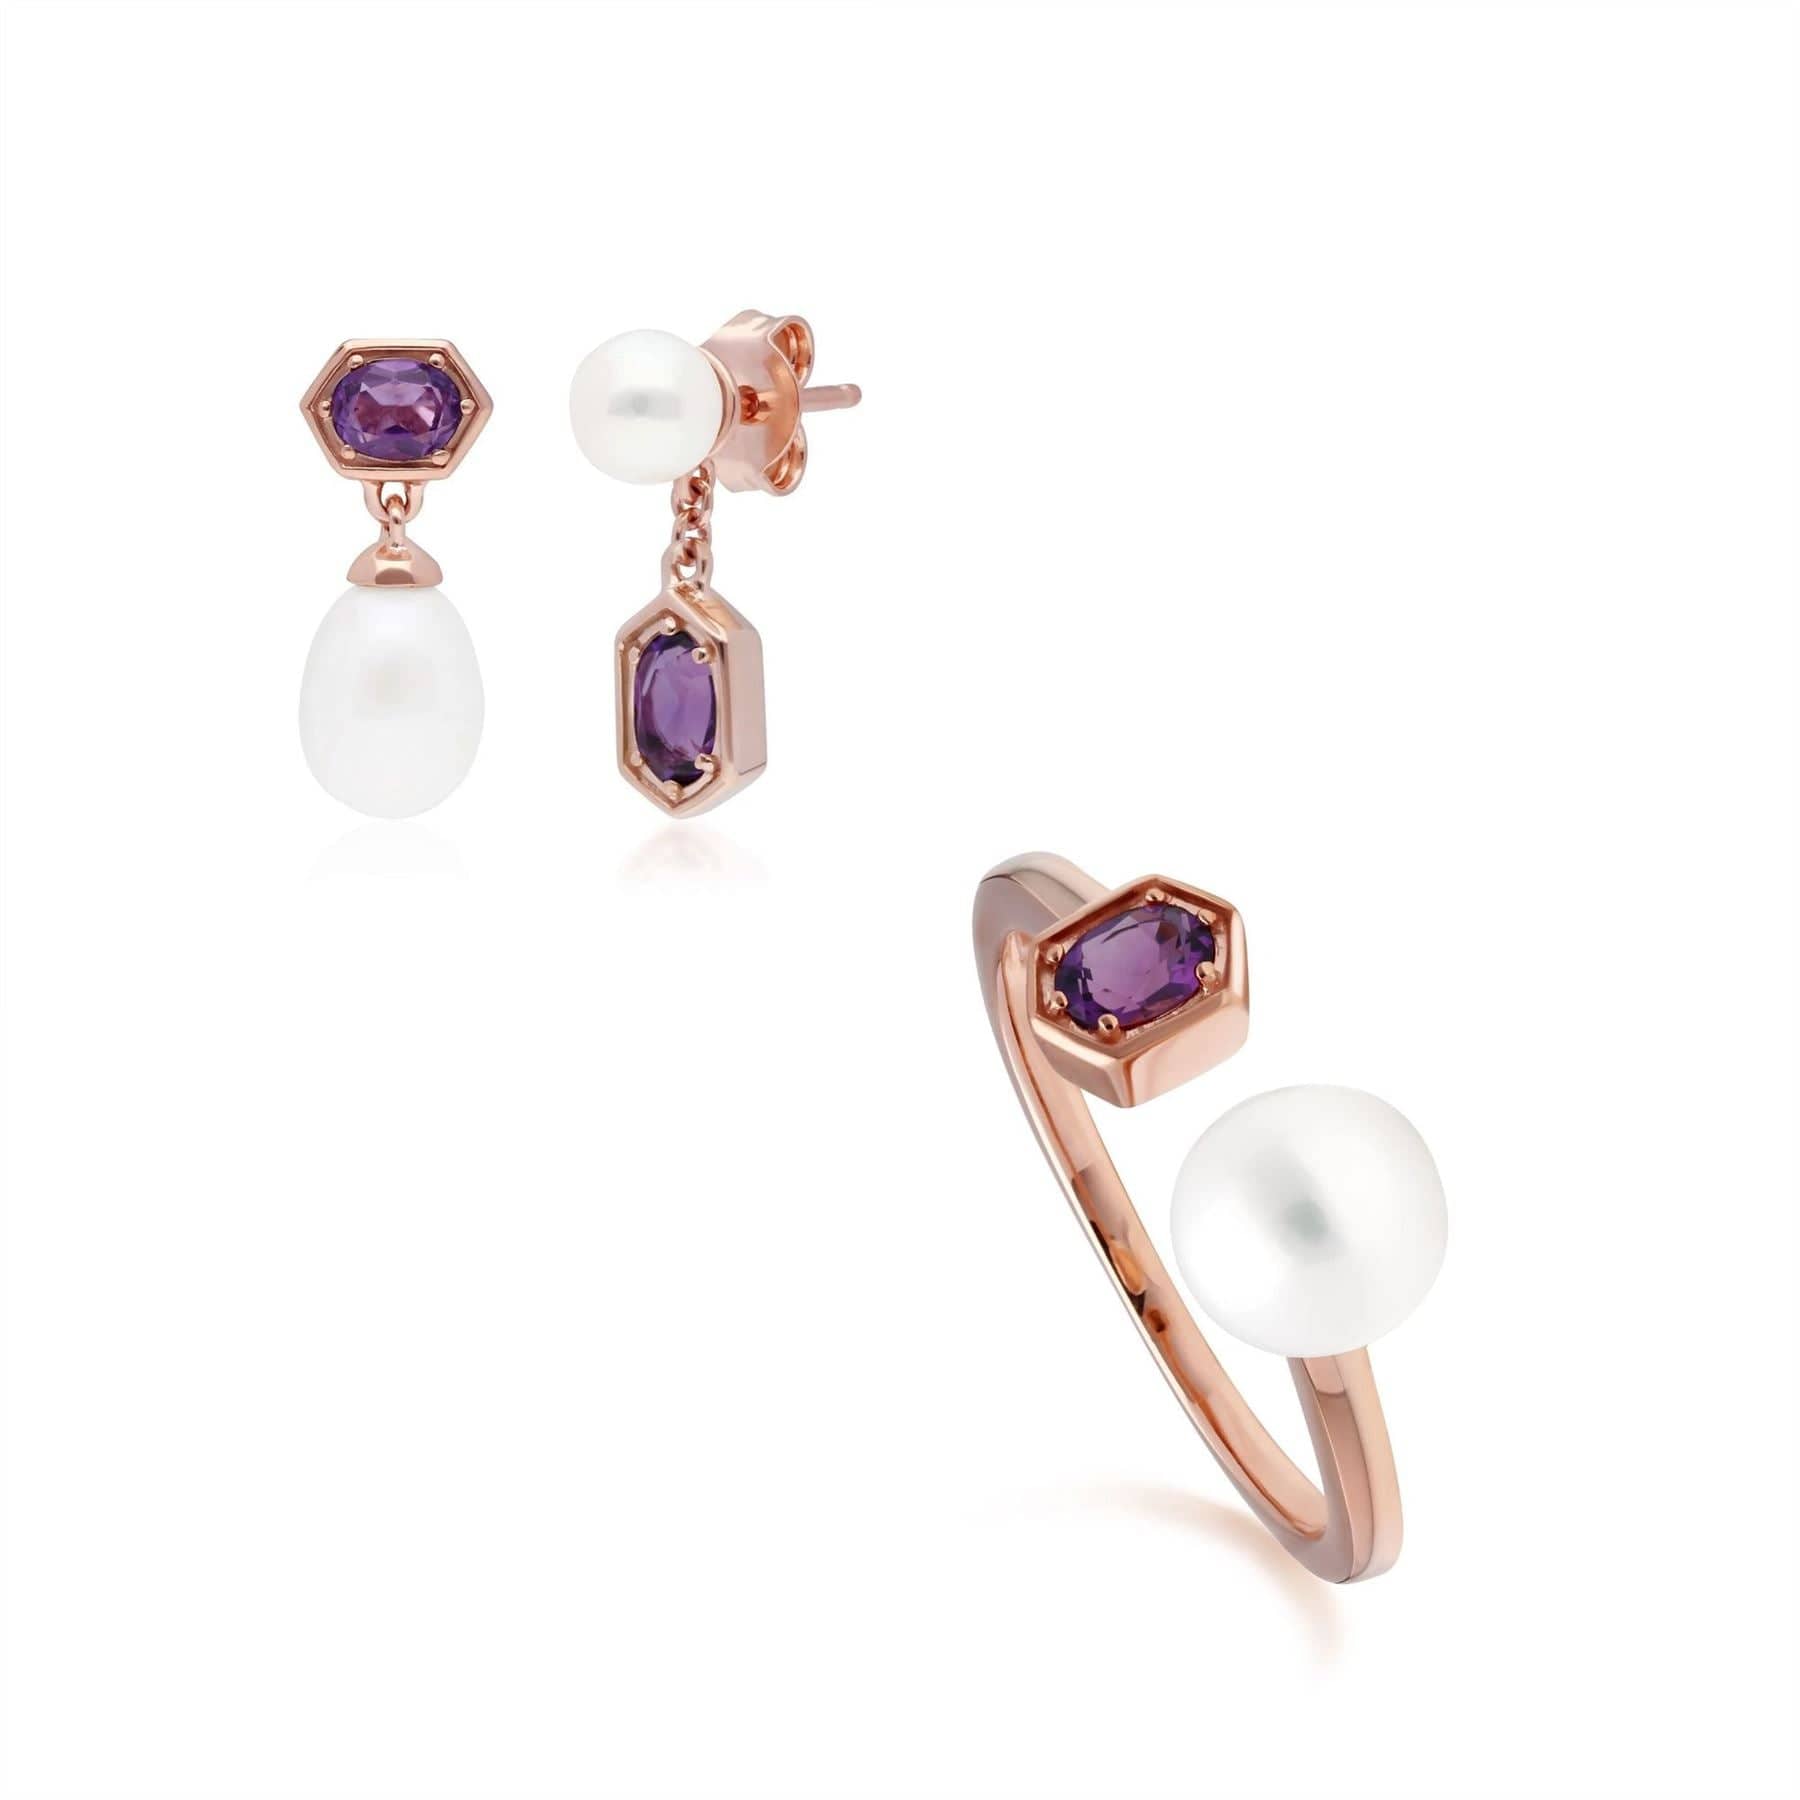 Image of Modern Pearl & Amethyst Earring & Ring Set in Rose Gold Plated Silver